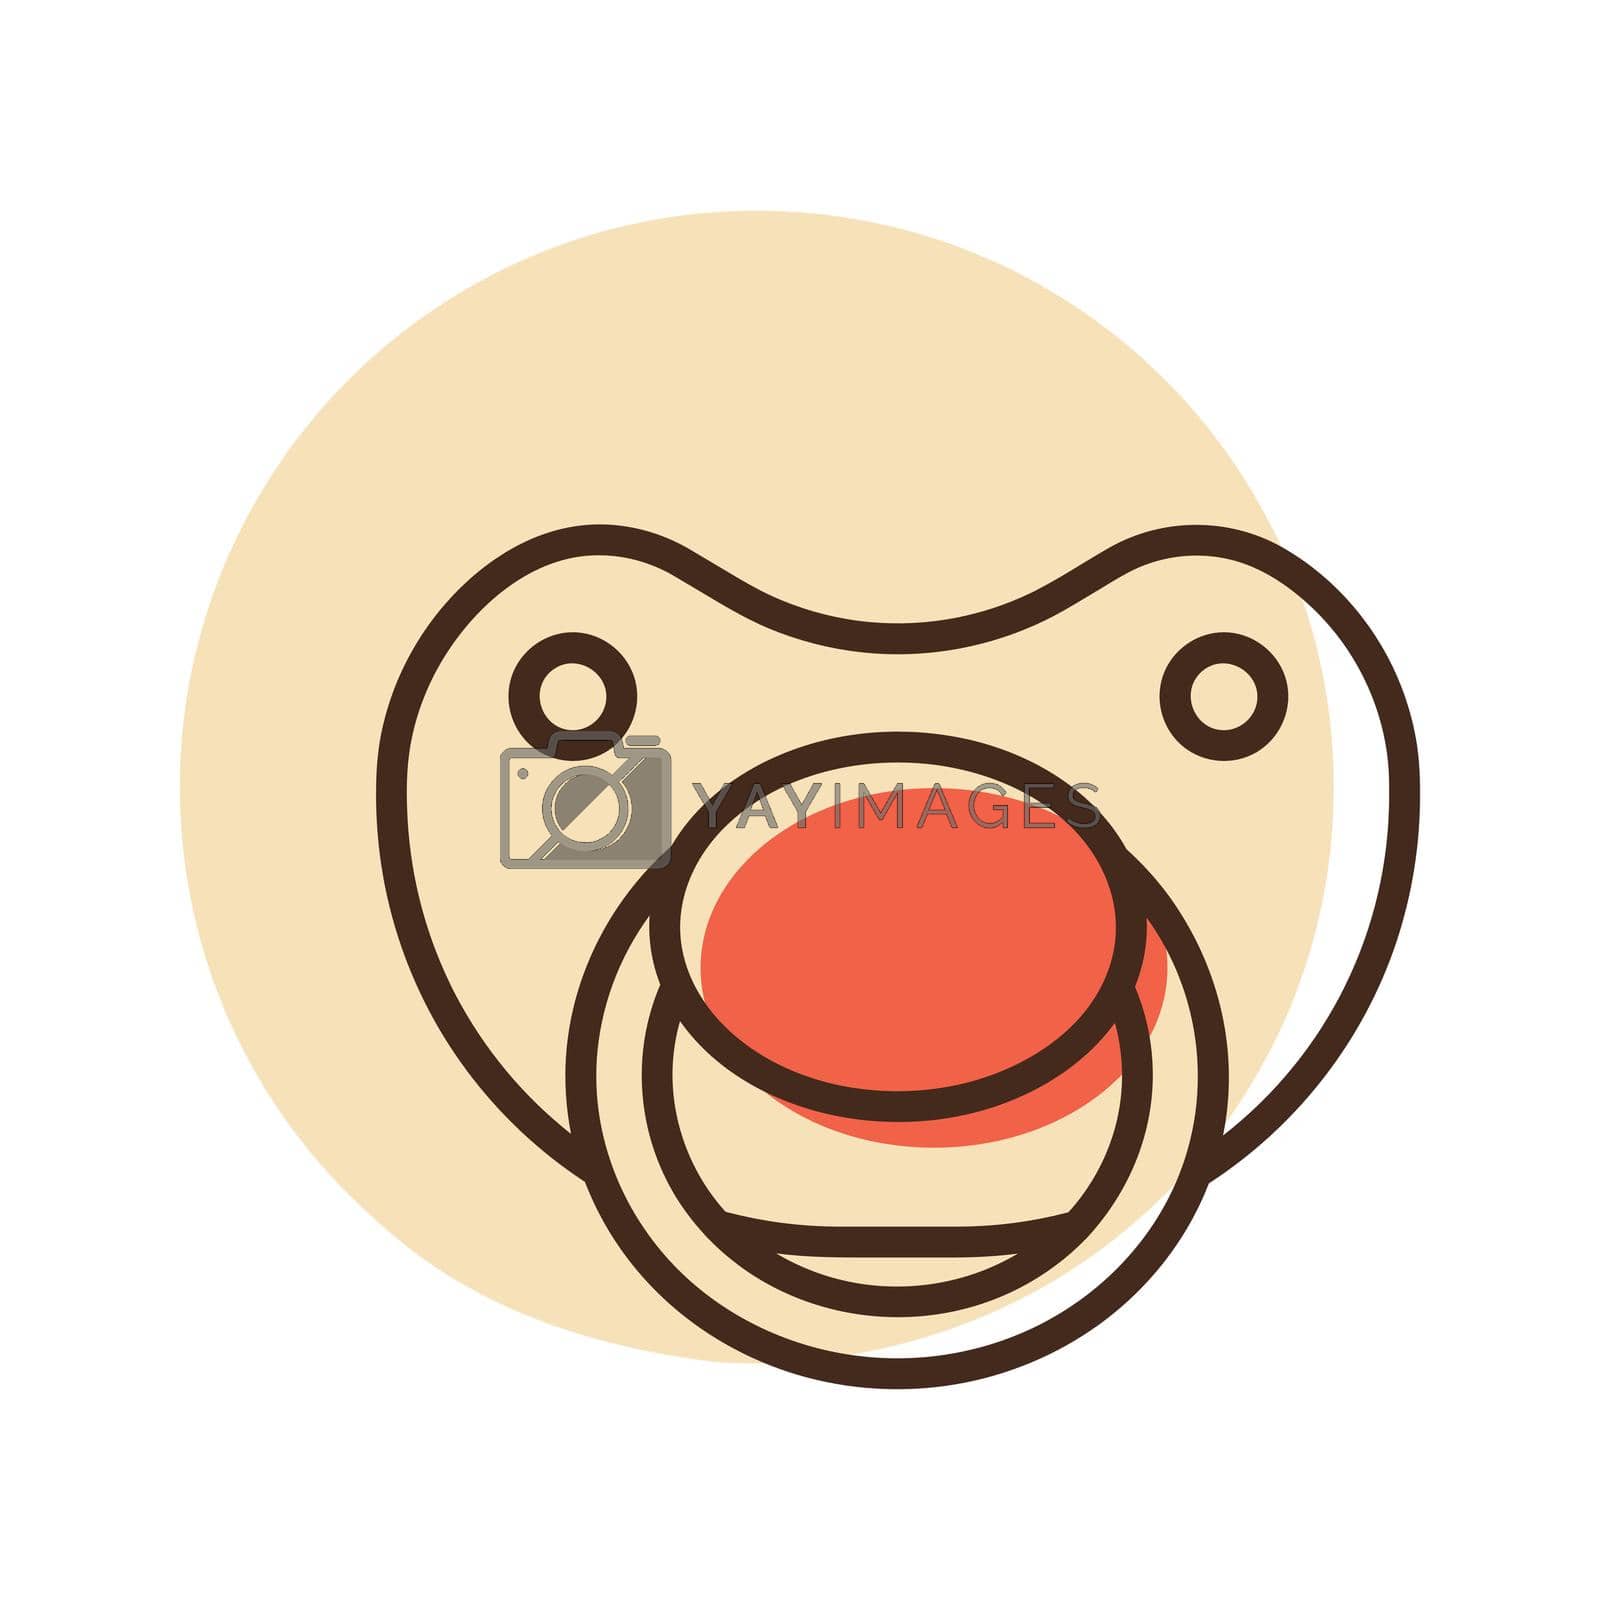 Baby dummy teat vector icon. Graph symbol for children and newborn babies web site and apps design, logo, app, UI